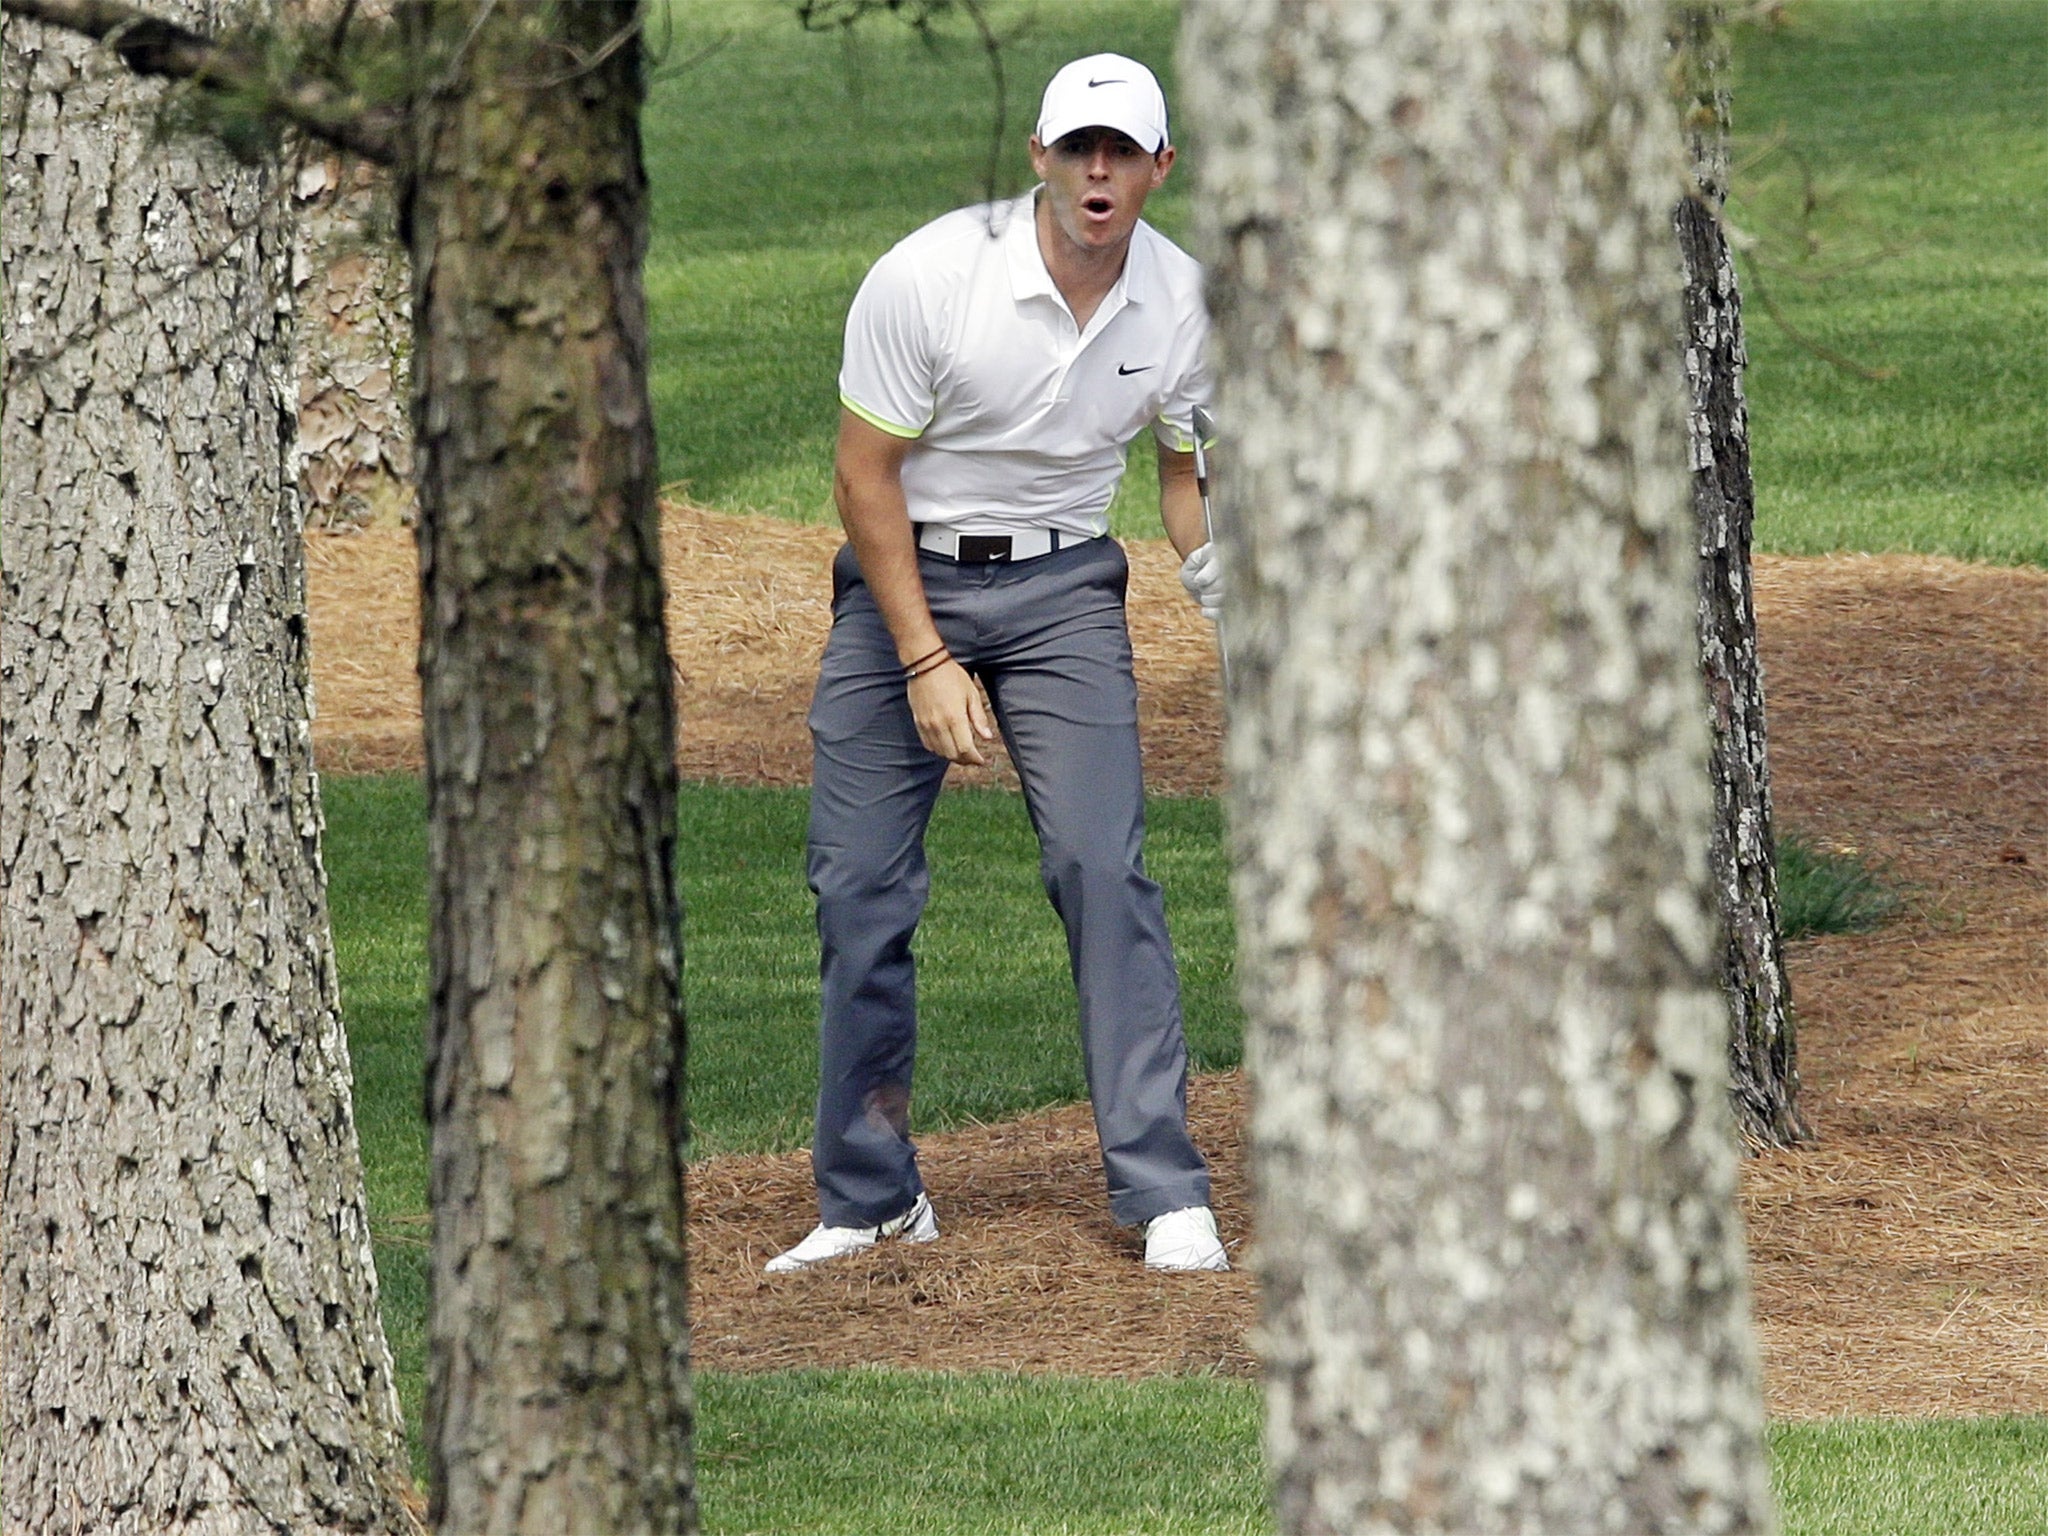 Rory McIlroy watches closely as his ball flies between the trees during his practice round at Augusta on Wednesday